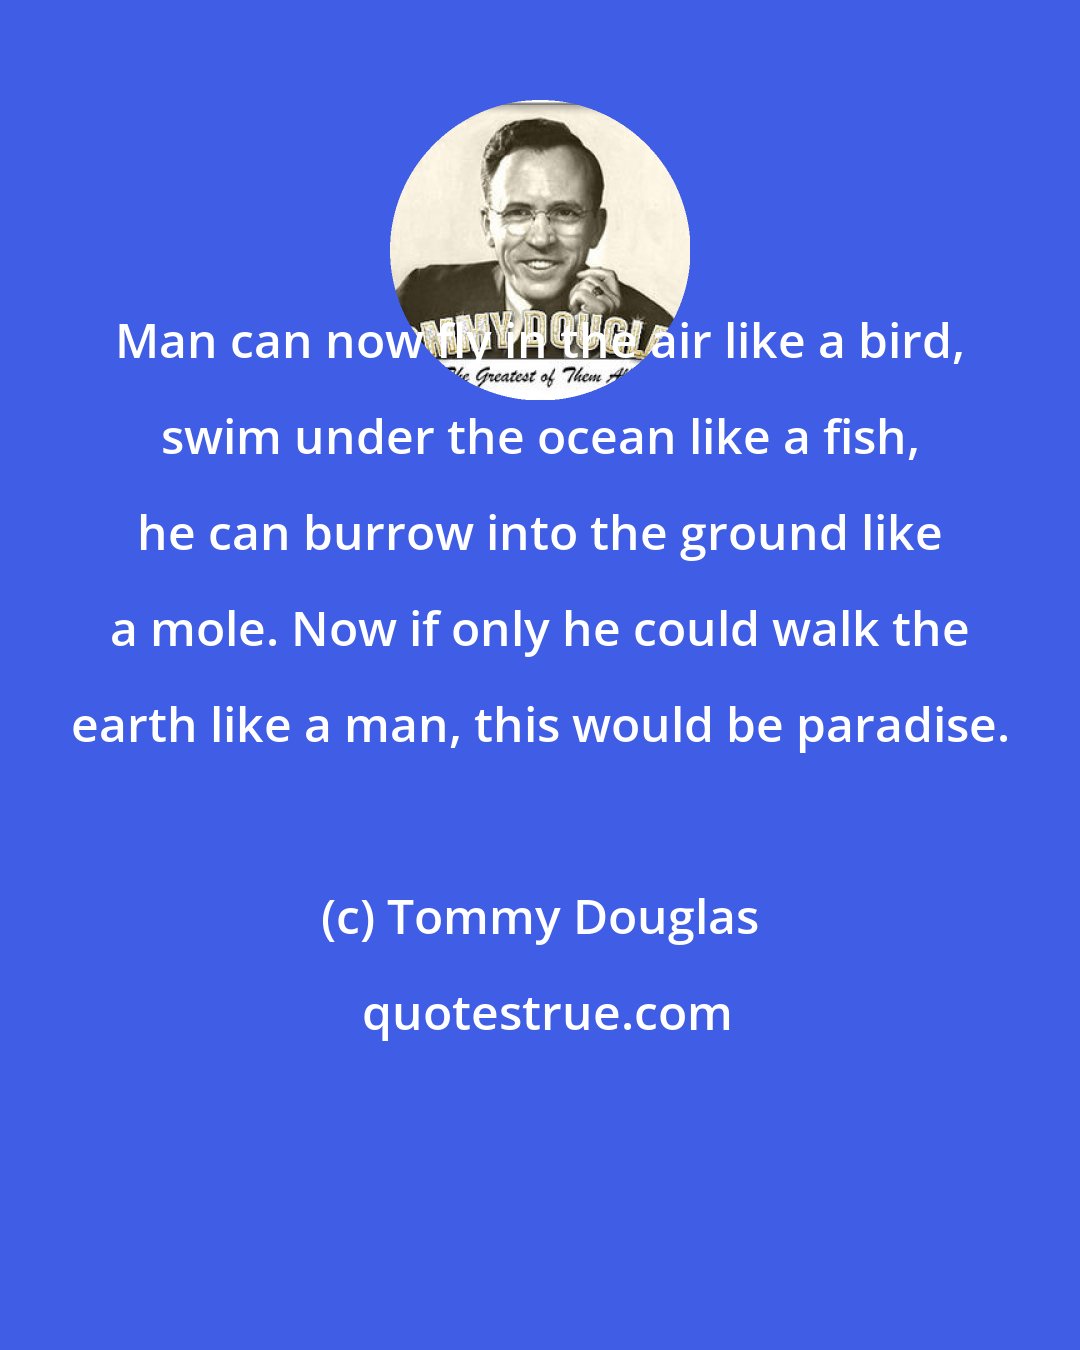 Tommy Douglas: Man can now fly in the air like a bird, swim under the ocean like a fish, he can burrow into the ground like a mole. Now if only he could walk the earth like a man, this would be paradise.